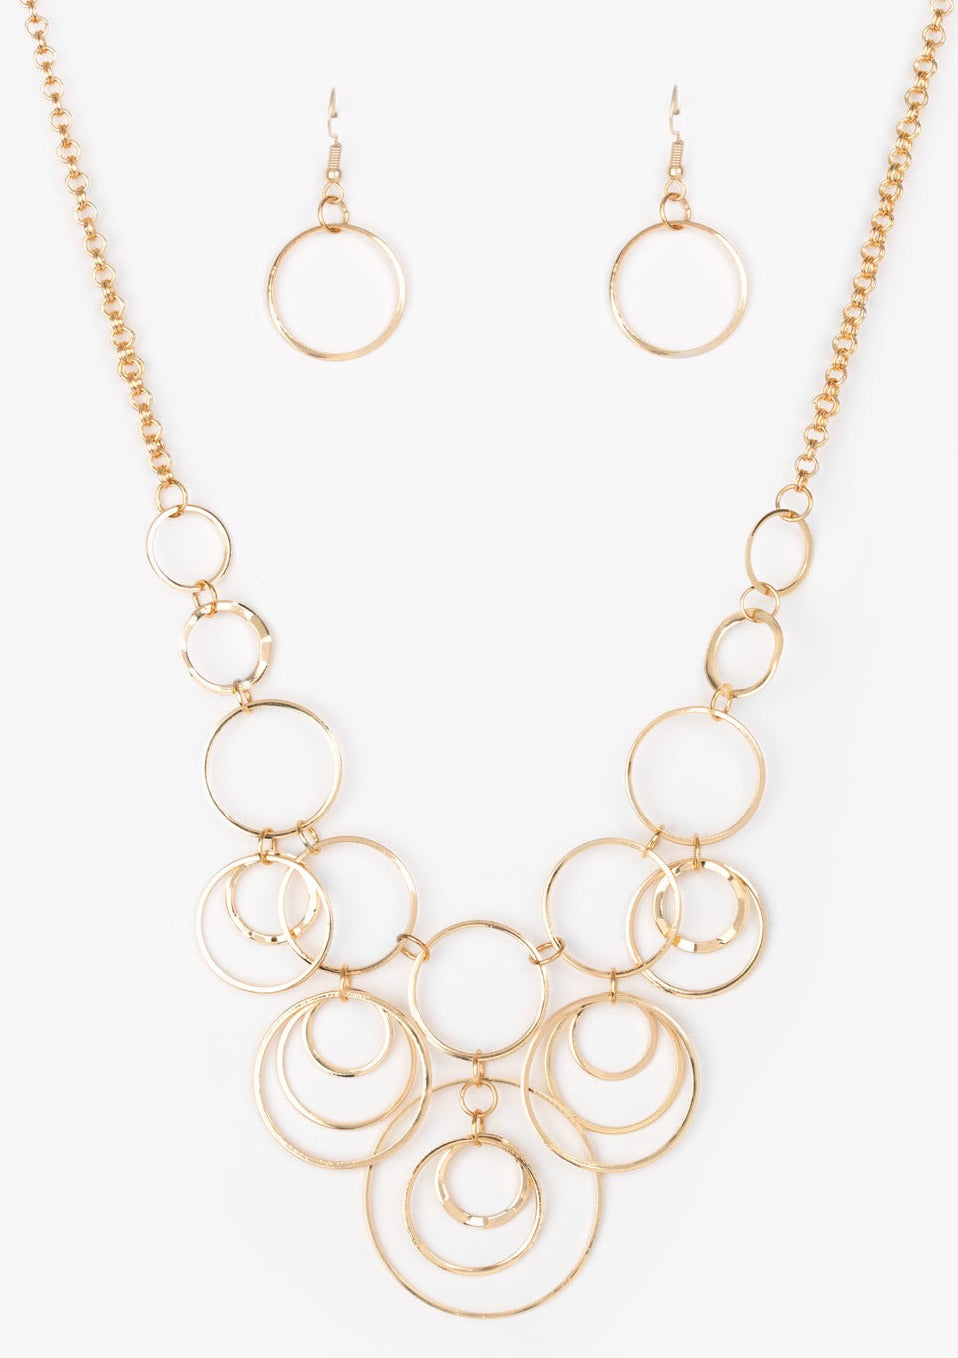 Break The Cycle - Gold - TKT’s Jewelry & Accessories 